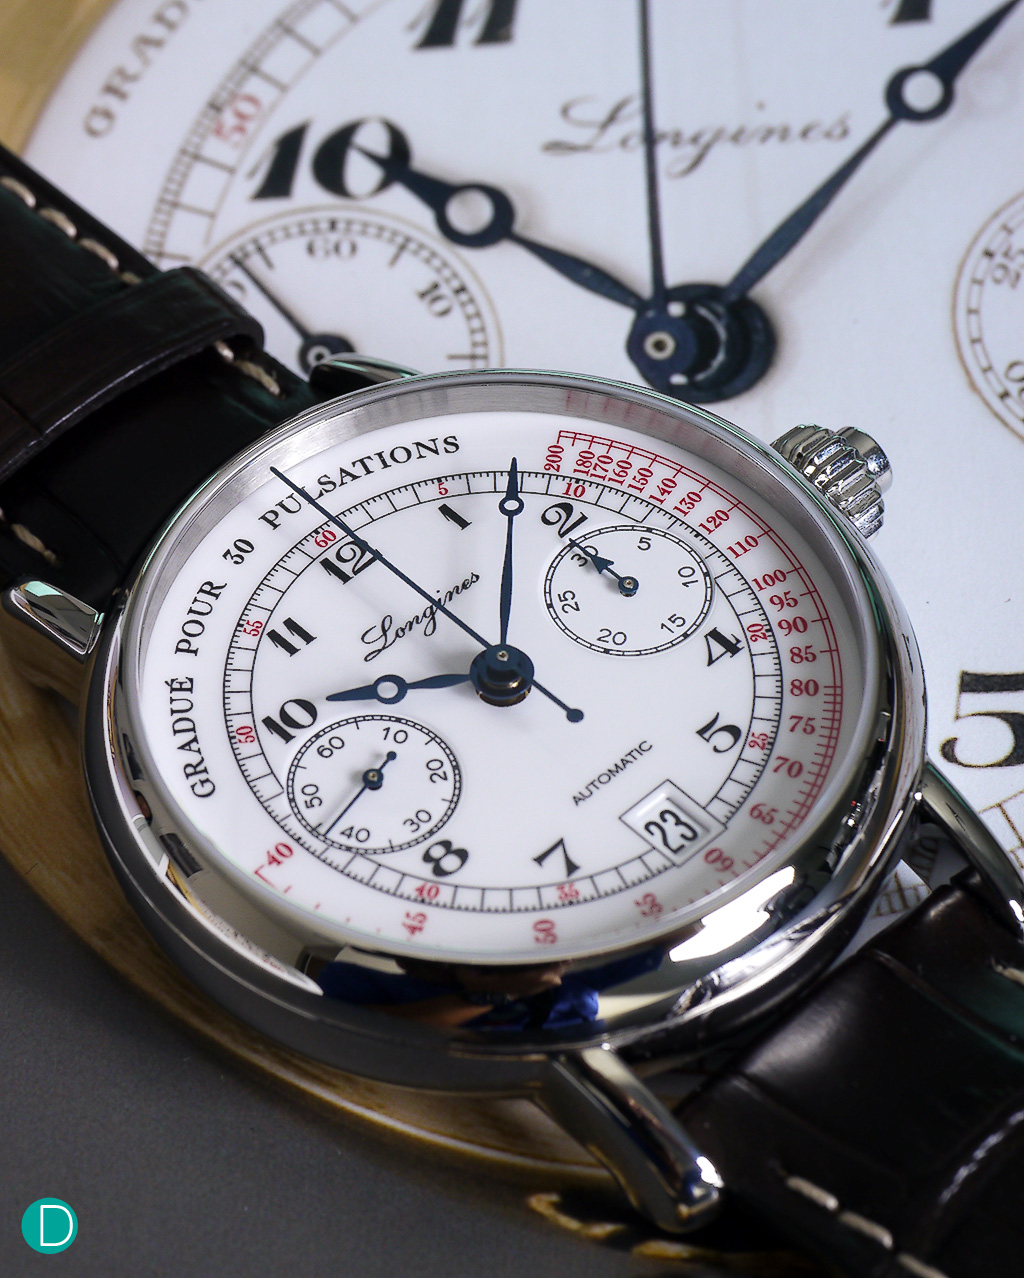 The Longines Pulsometer Chronograph. It is not just a pretty face; the watch offers a great value proposition as well.